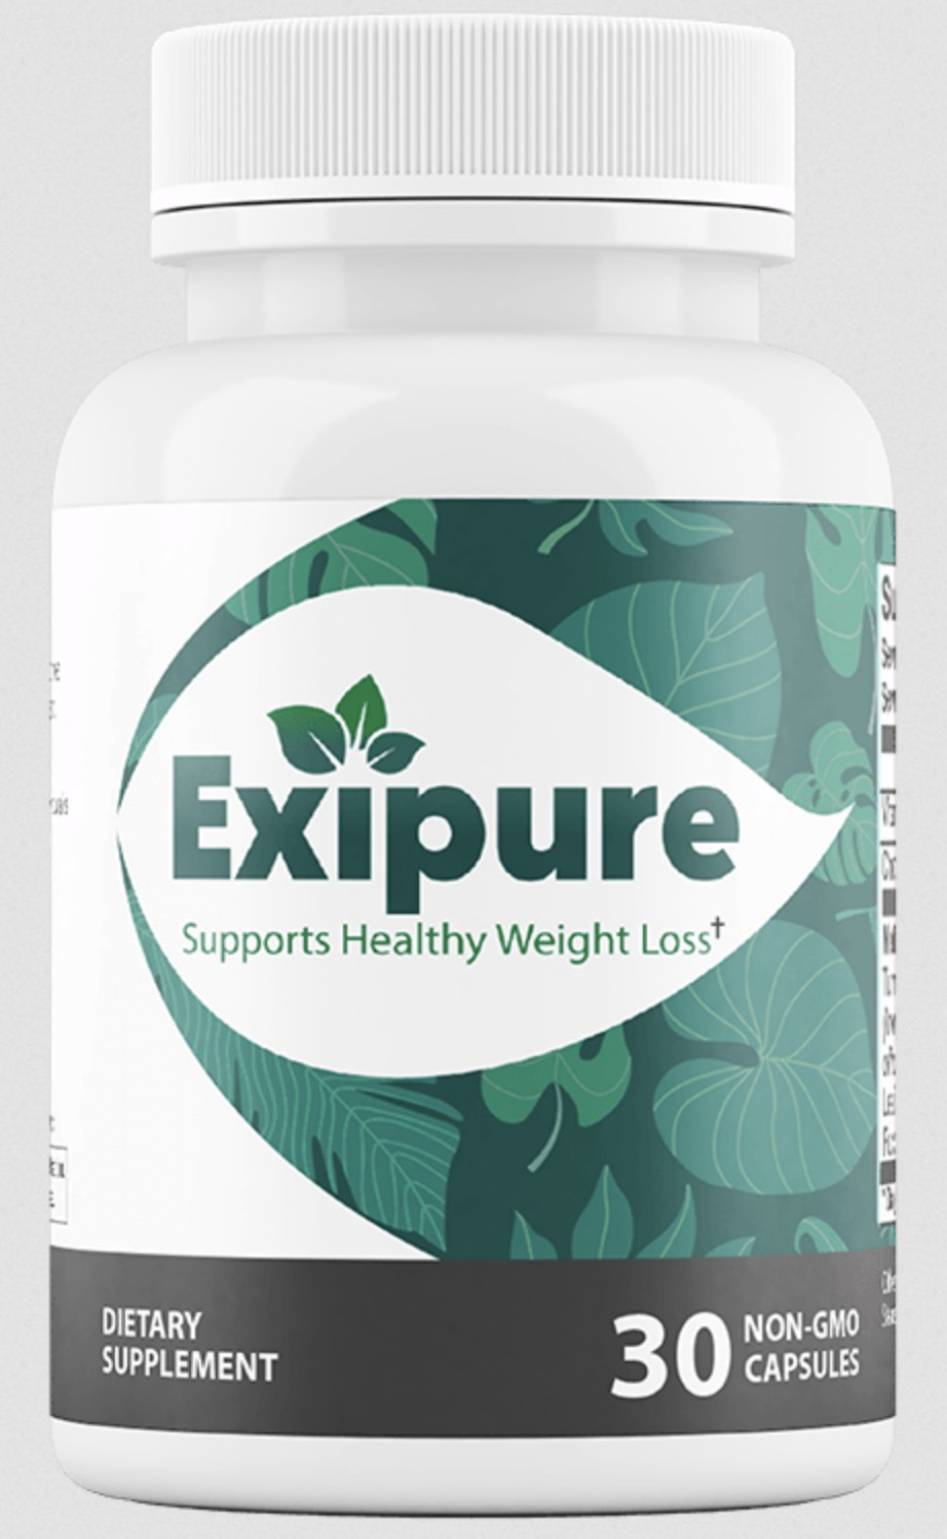 How Much Does Exipure Cost